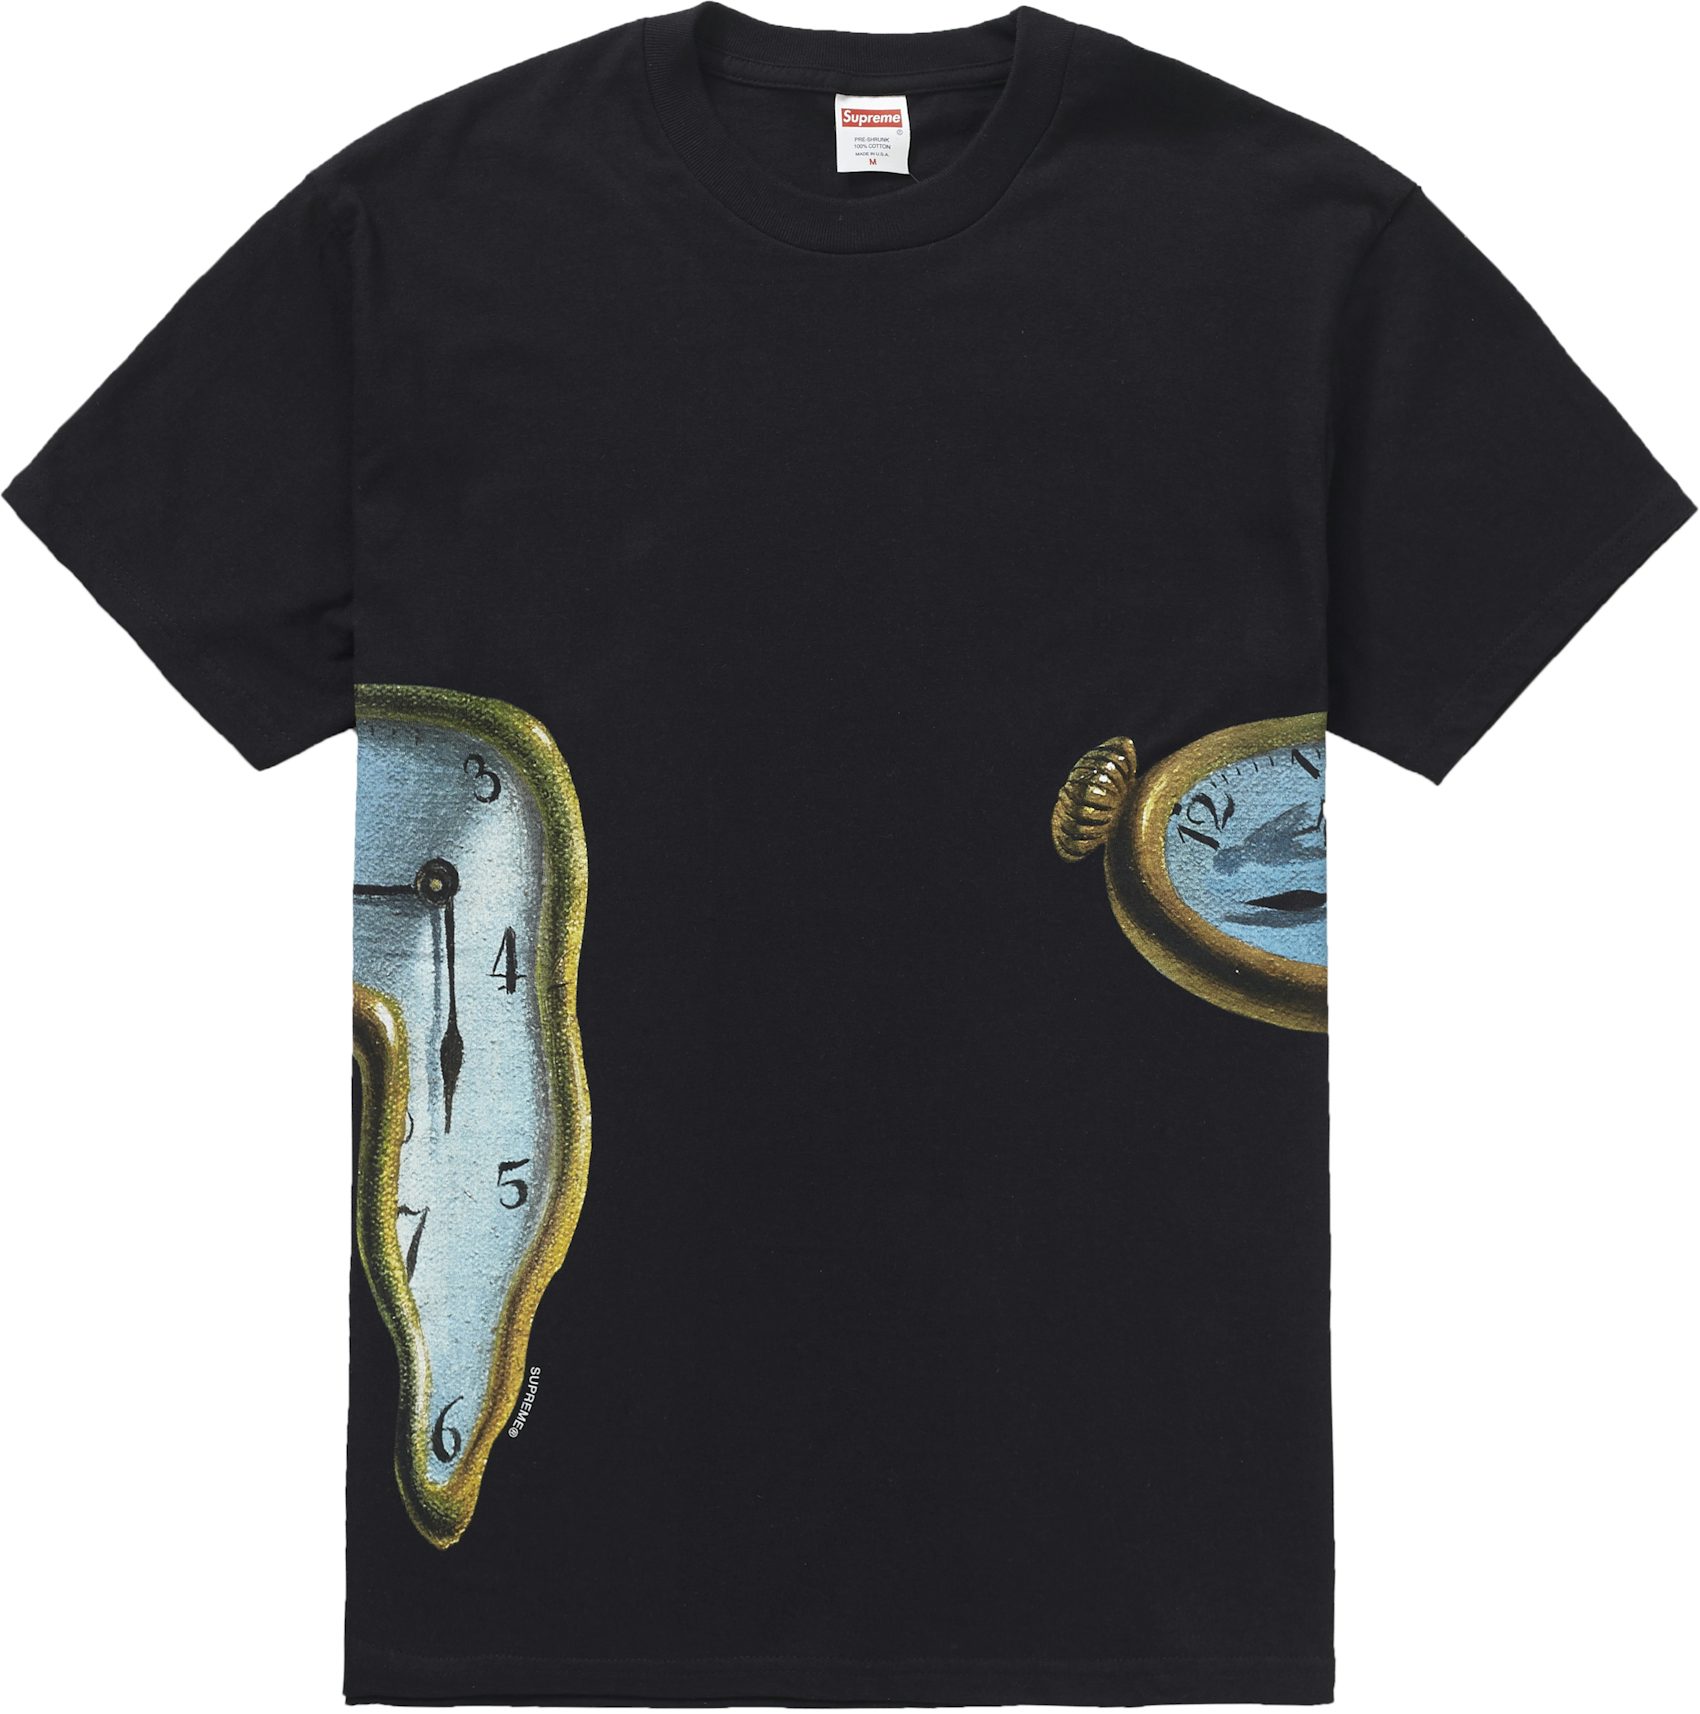 Buy Supreme T-Shirts Released Spring/Summer 19 - Stockx